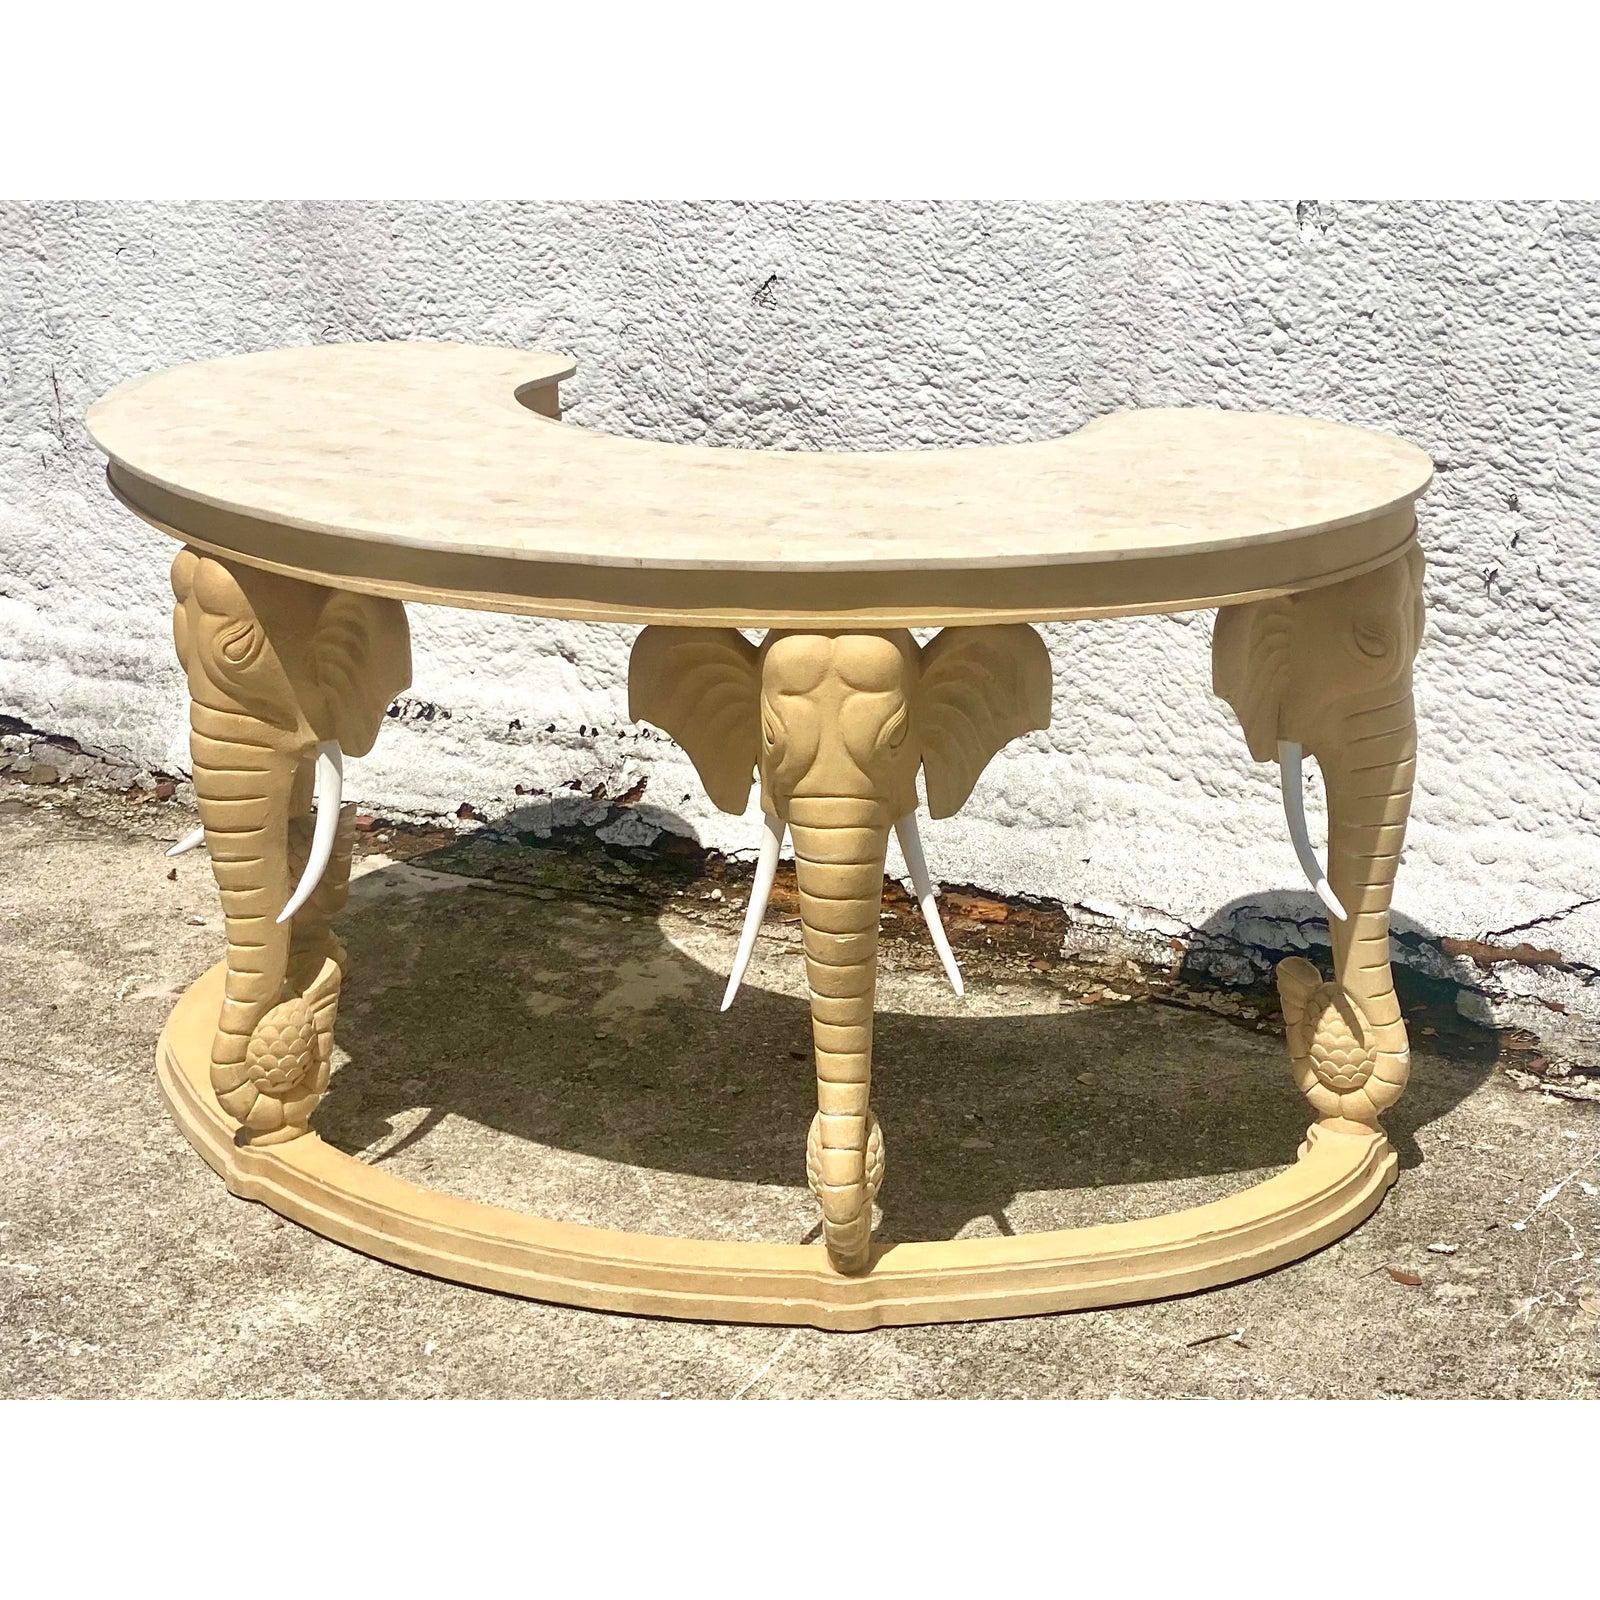 Vintage Regency writing desk and chair. Beautiful curved top with a tessellated stone surface. Striking matching chairs. All tusks intact. Acquired from a Palm Beach estate.